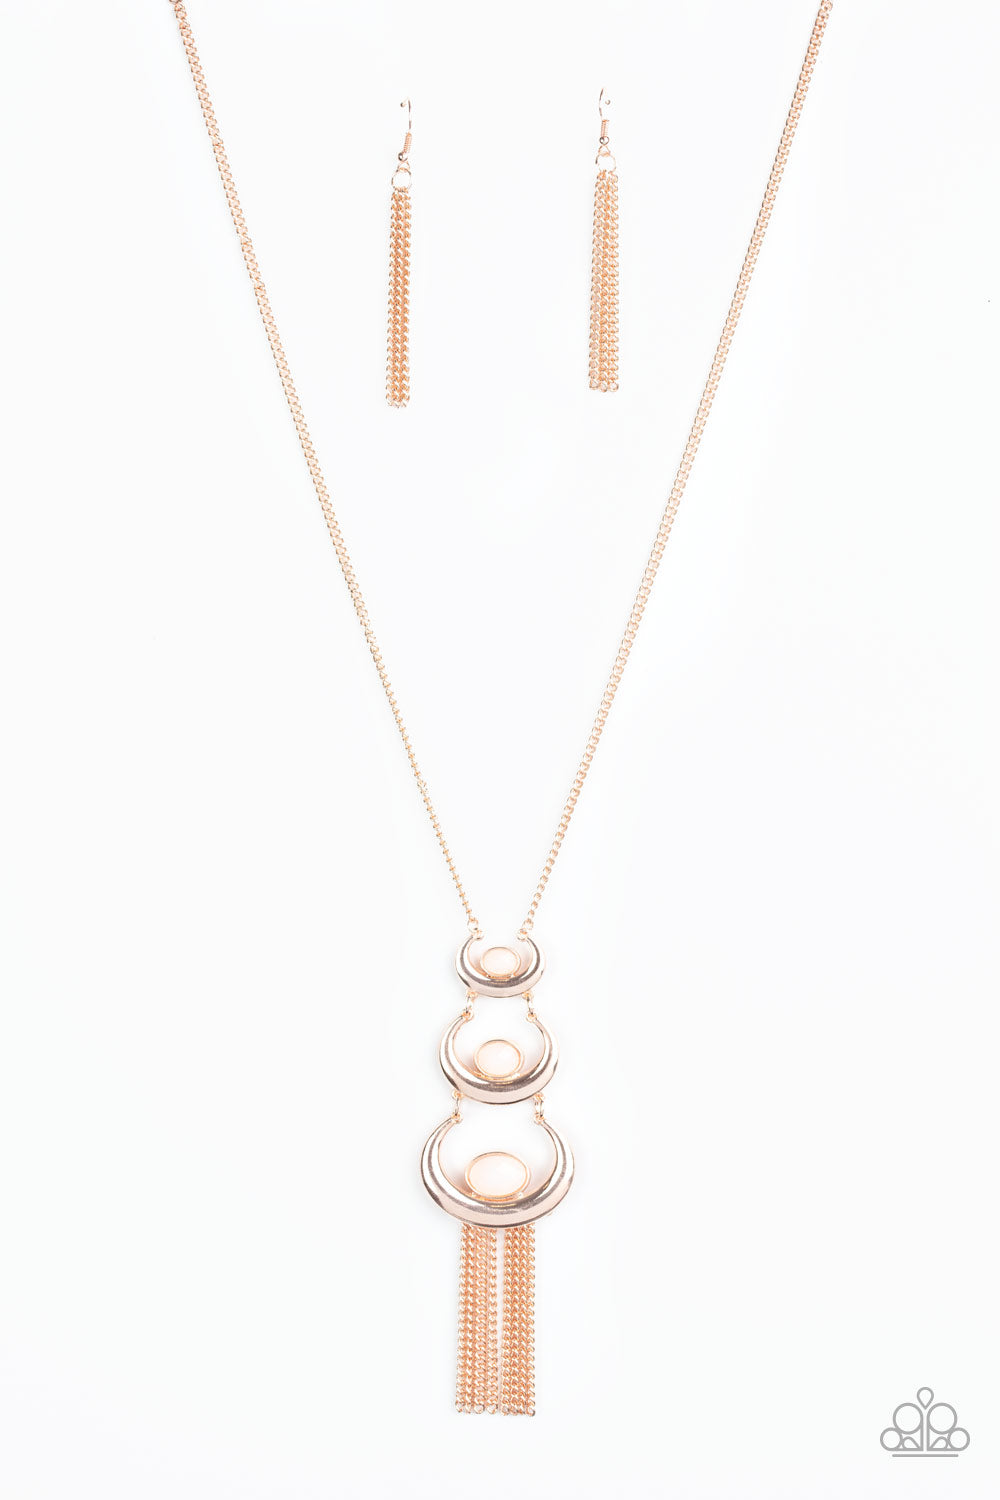 As MOON As I Can - Rose Gold Necklace - Paparazzi Accessories